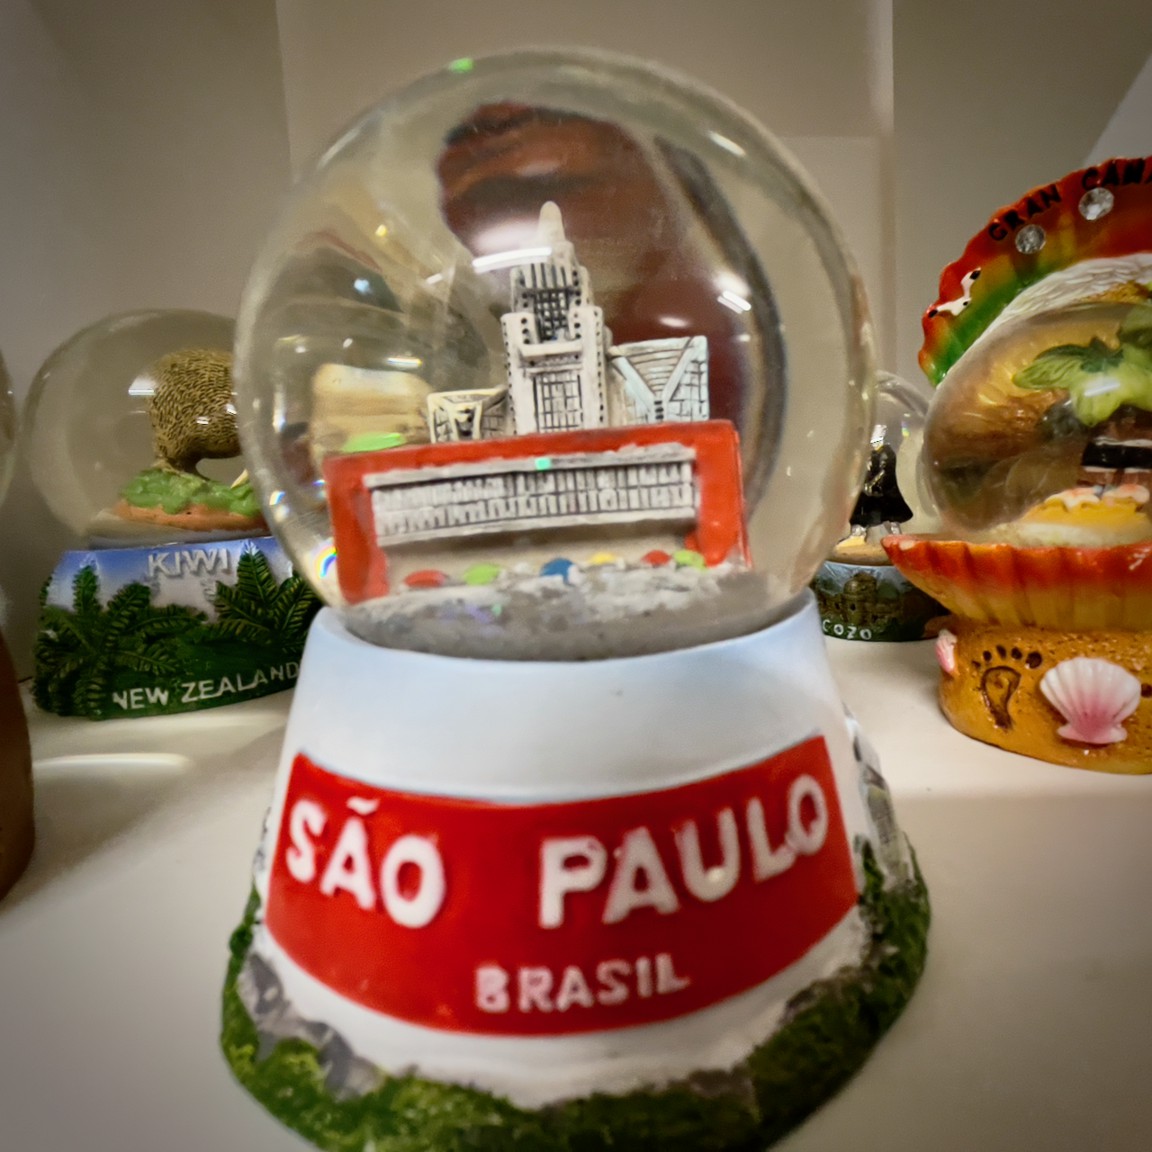 Check out a sample of Fat Beehive’s impressive snowglobe collection. This used to be a thing back in the Rivington Street office: if you went on holiday it was the LAW to bring back a snowglobe. #FatBeehive25years #digitalagency #ExperiencedWebDesigners